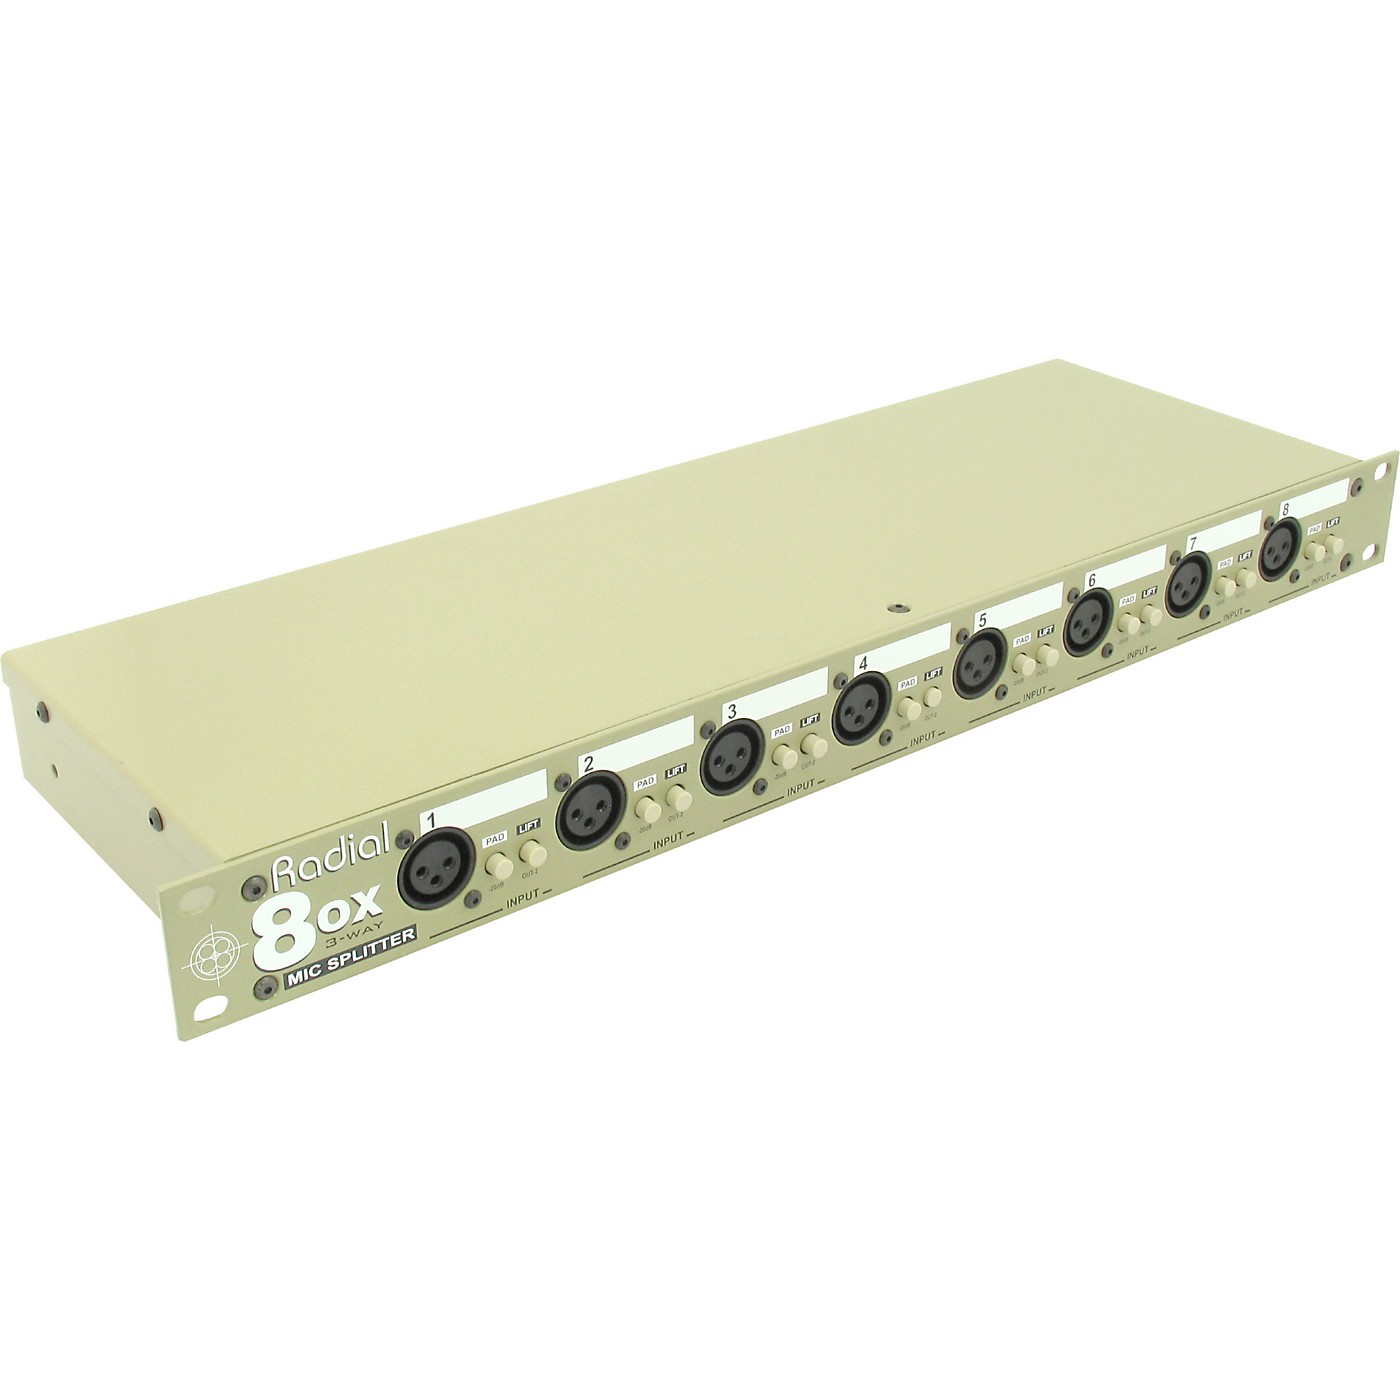 Radial Engineering 8ox Eight Channel 3-way Microphone Splitter thumbnail